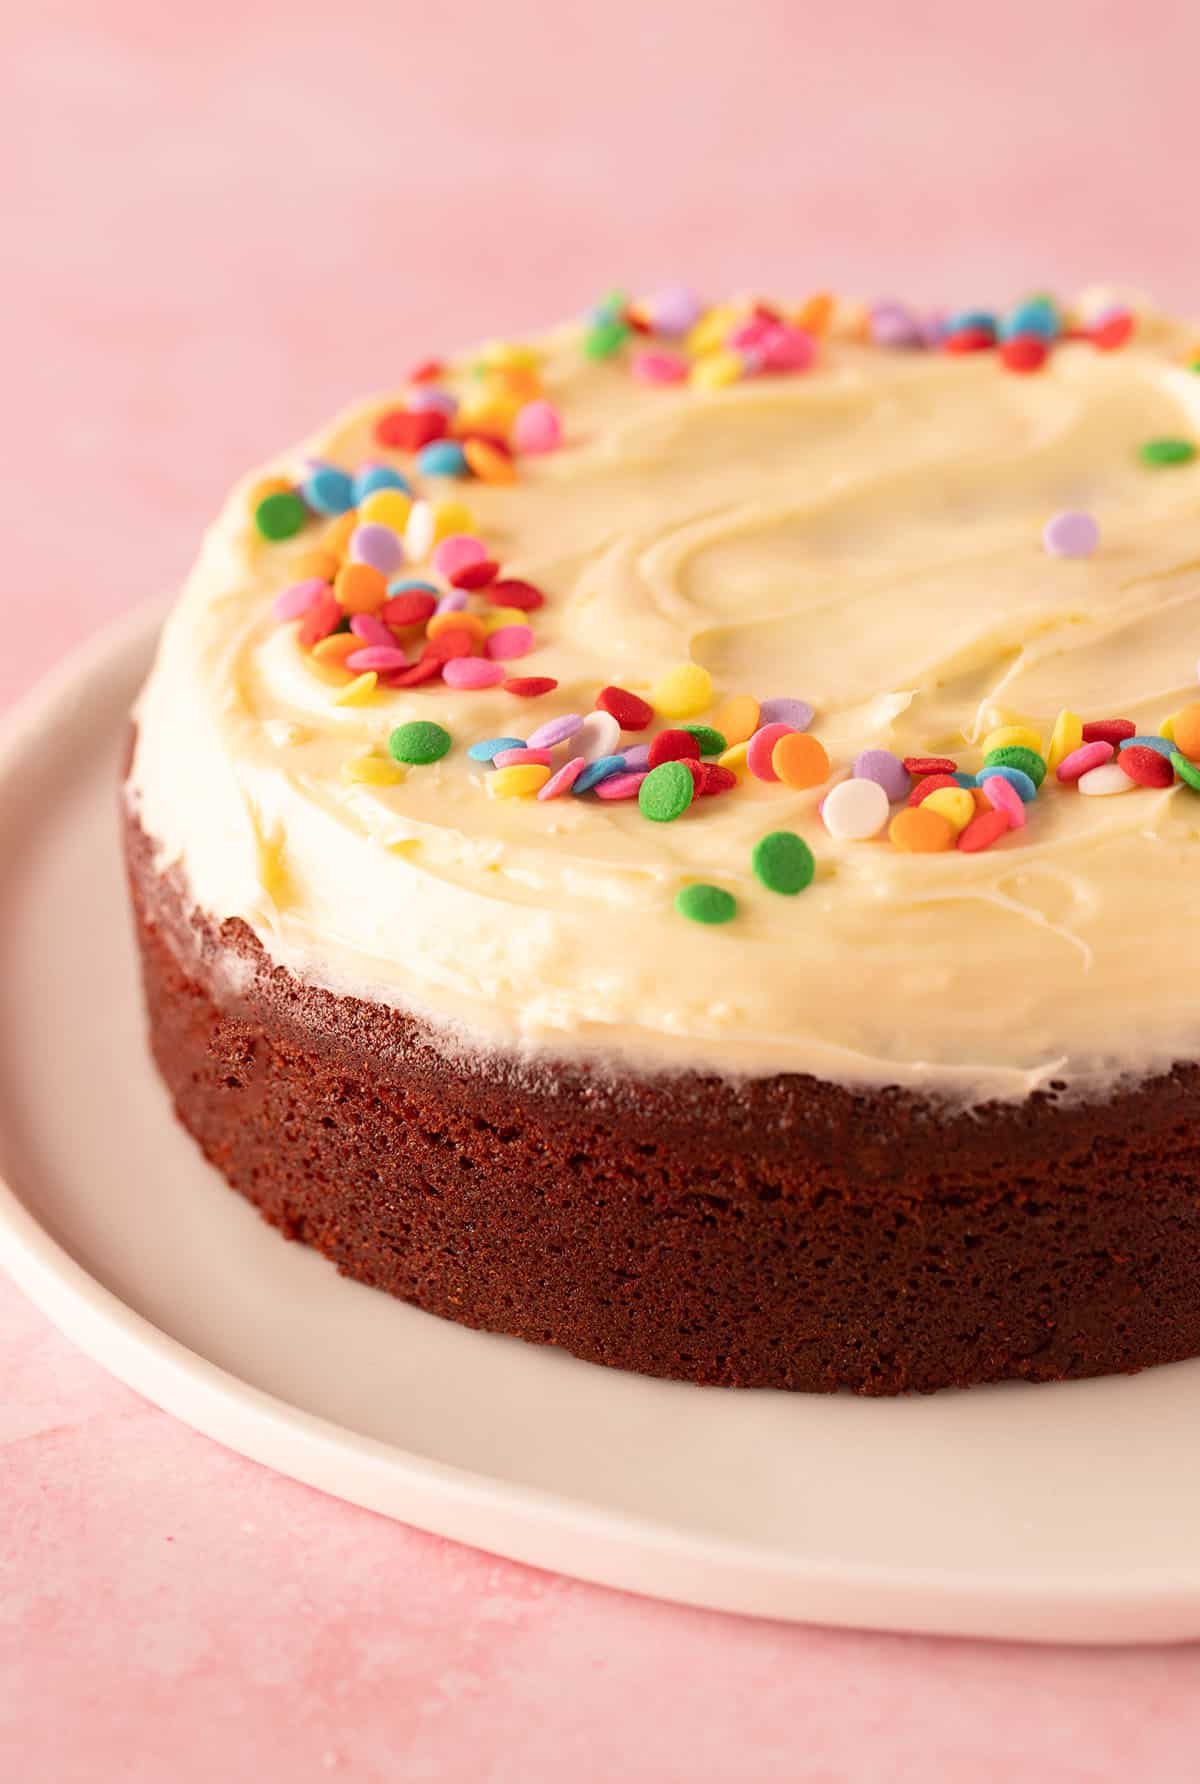 A mini Red Velvet Cake decorated with sprinkles.